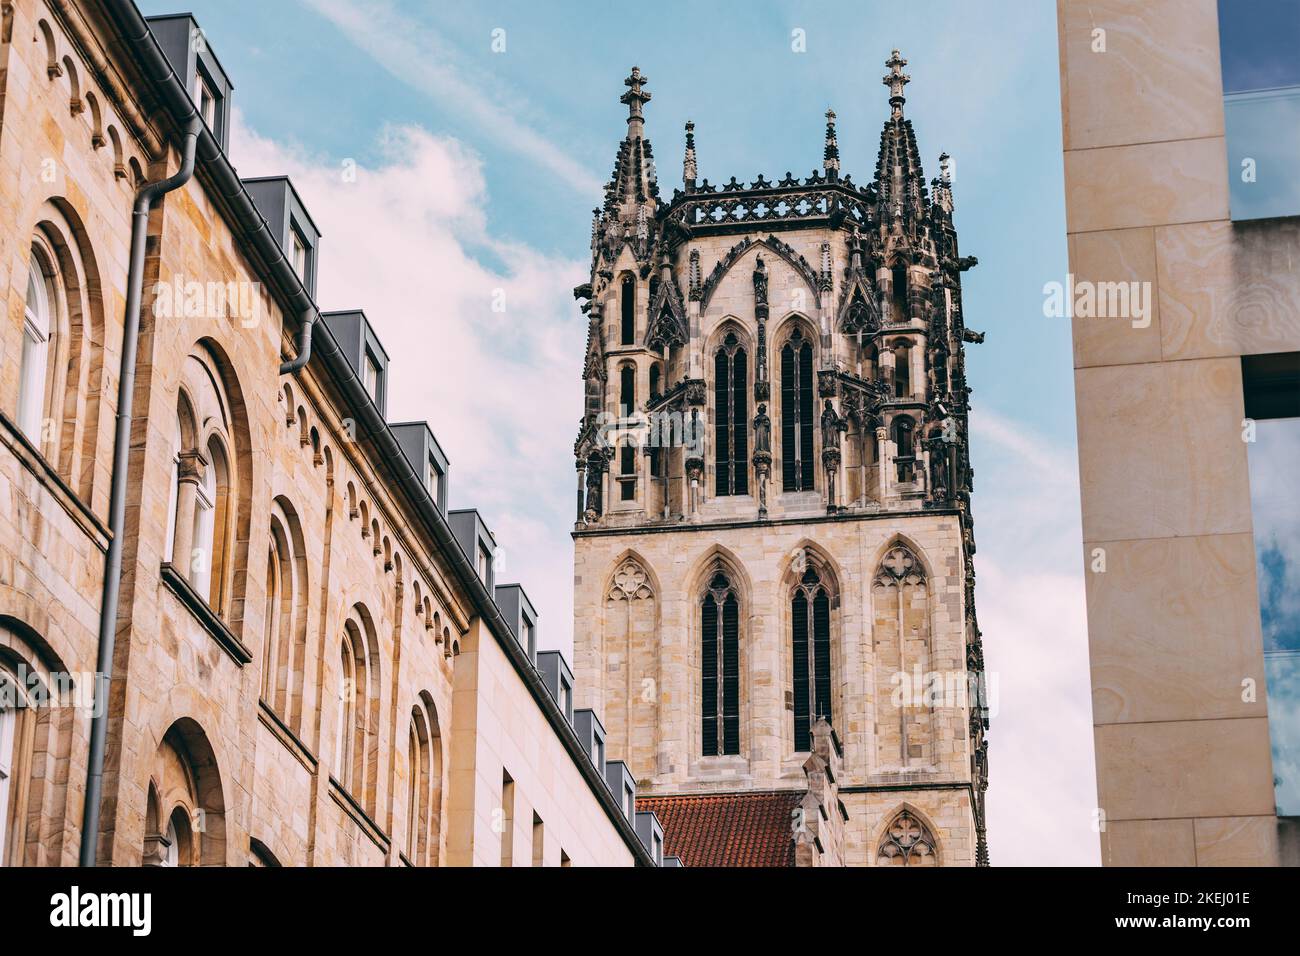 Old town street with Liebfrauen or Uberwasserkirche church tower in Munster, Germany. City life and travel concept Stock Photo